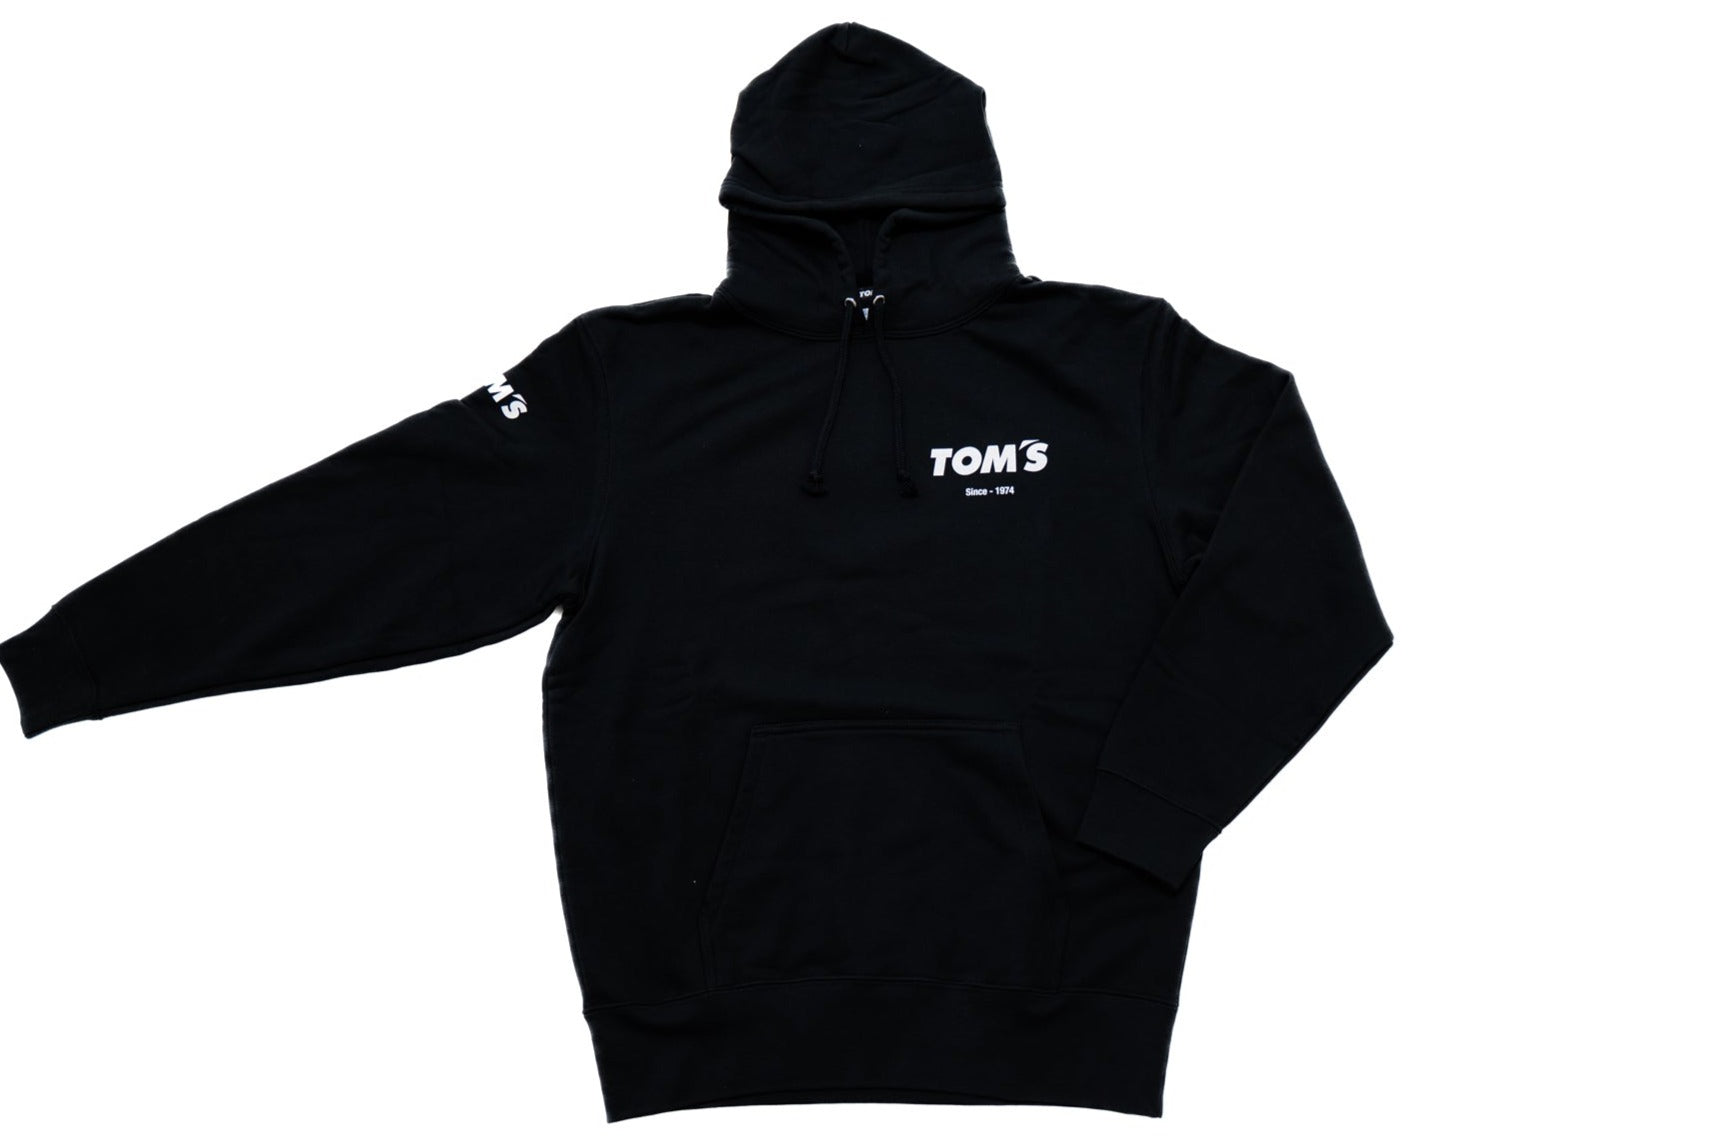 TOM'S Racing - Tradition & Innovation Premium Pullover Hoodie - 0